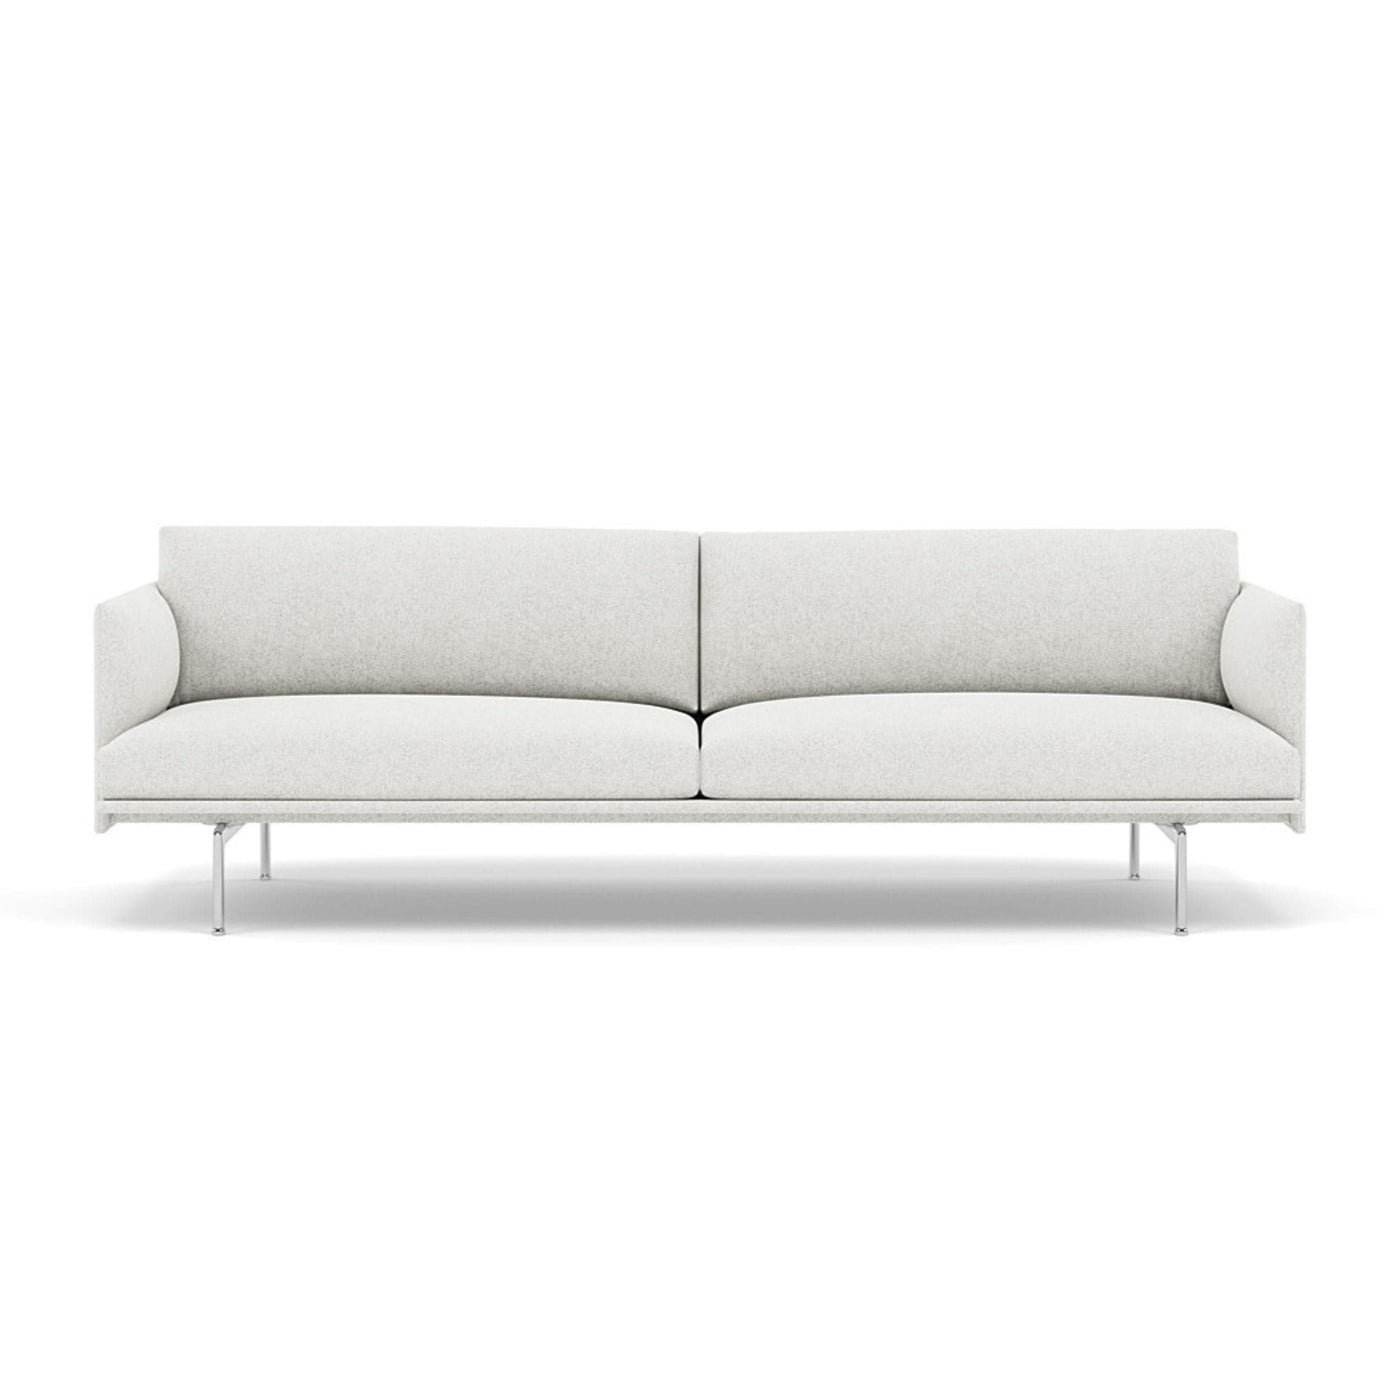 Muuto Outline Studio Sofa 220 in hallingdal 110 and polished aluminium legs. Made to order from someday designs. #colour_hallingdal-110-grey